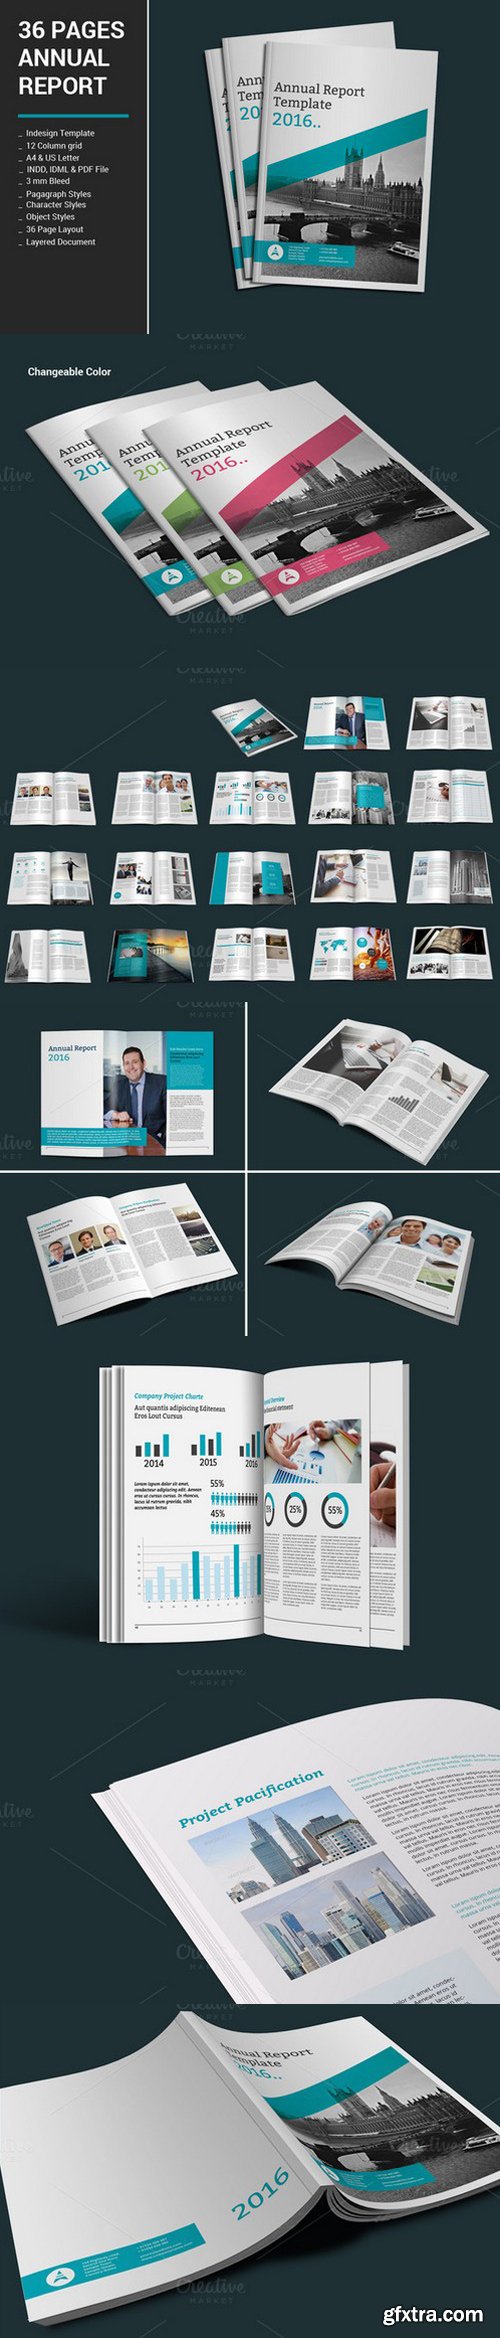 36 Pages Annual Report » GFxtra